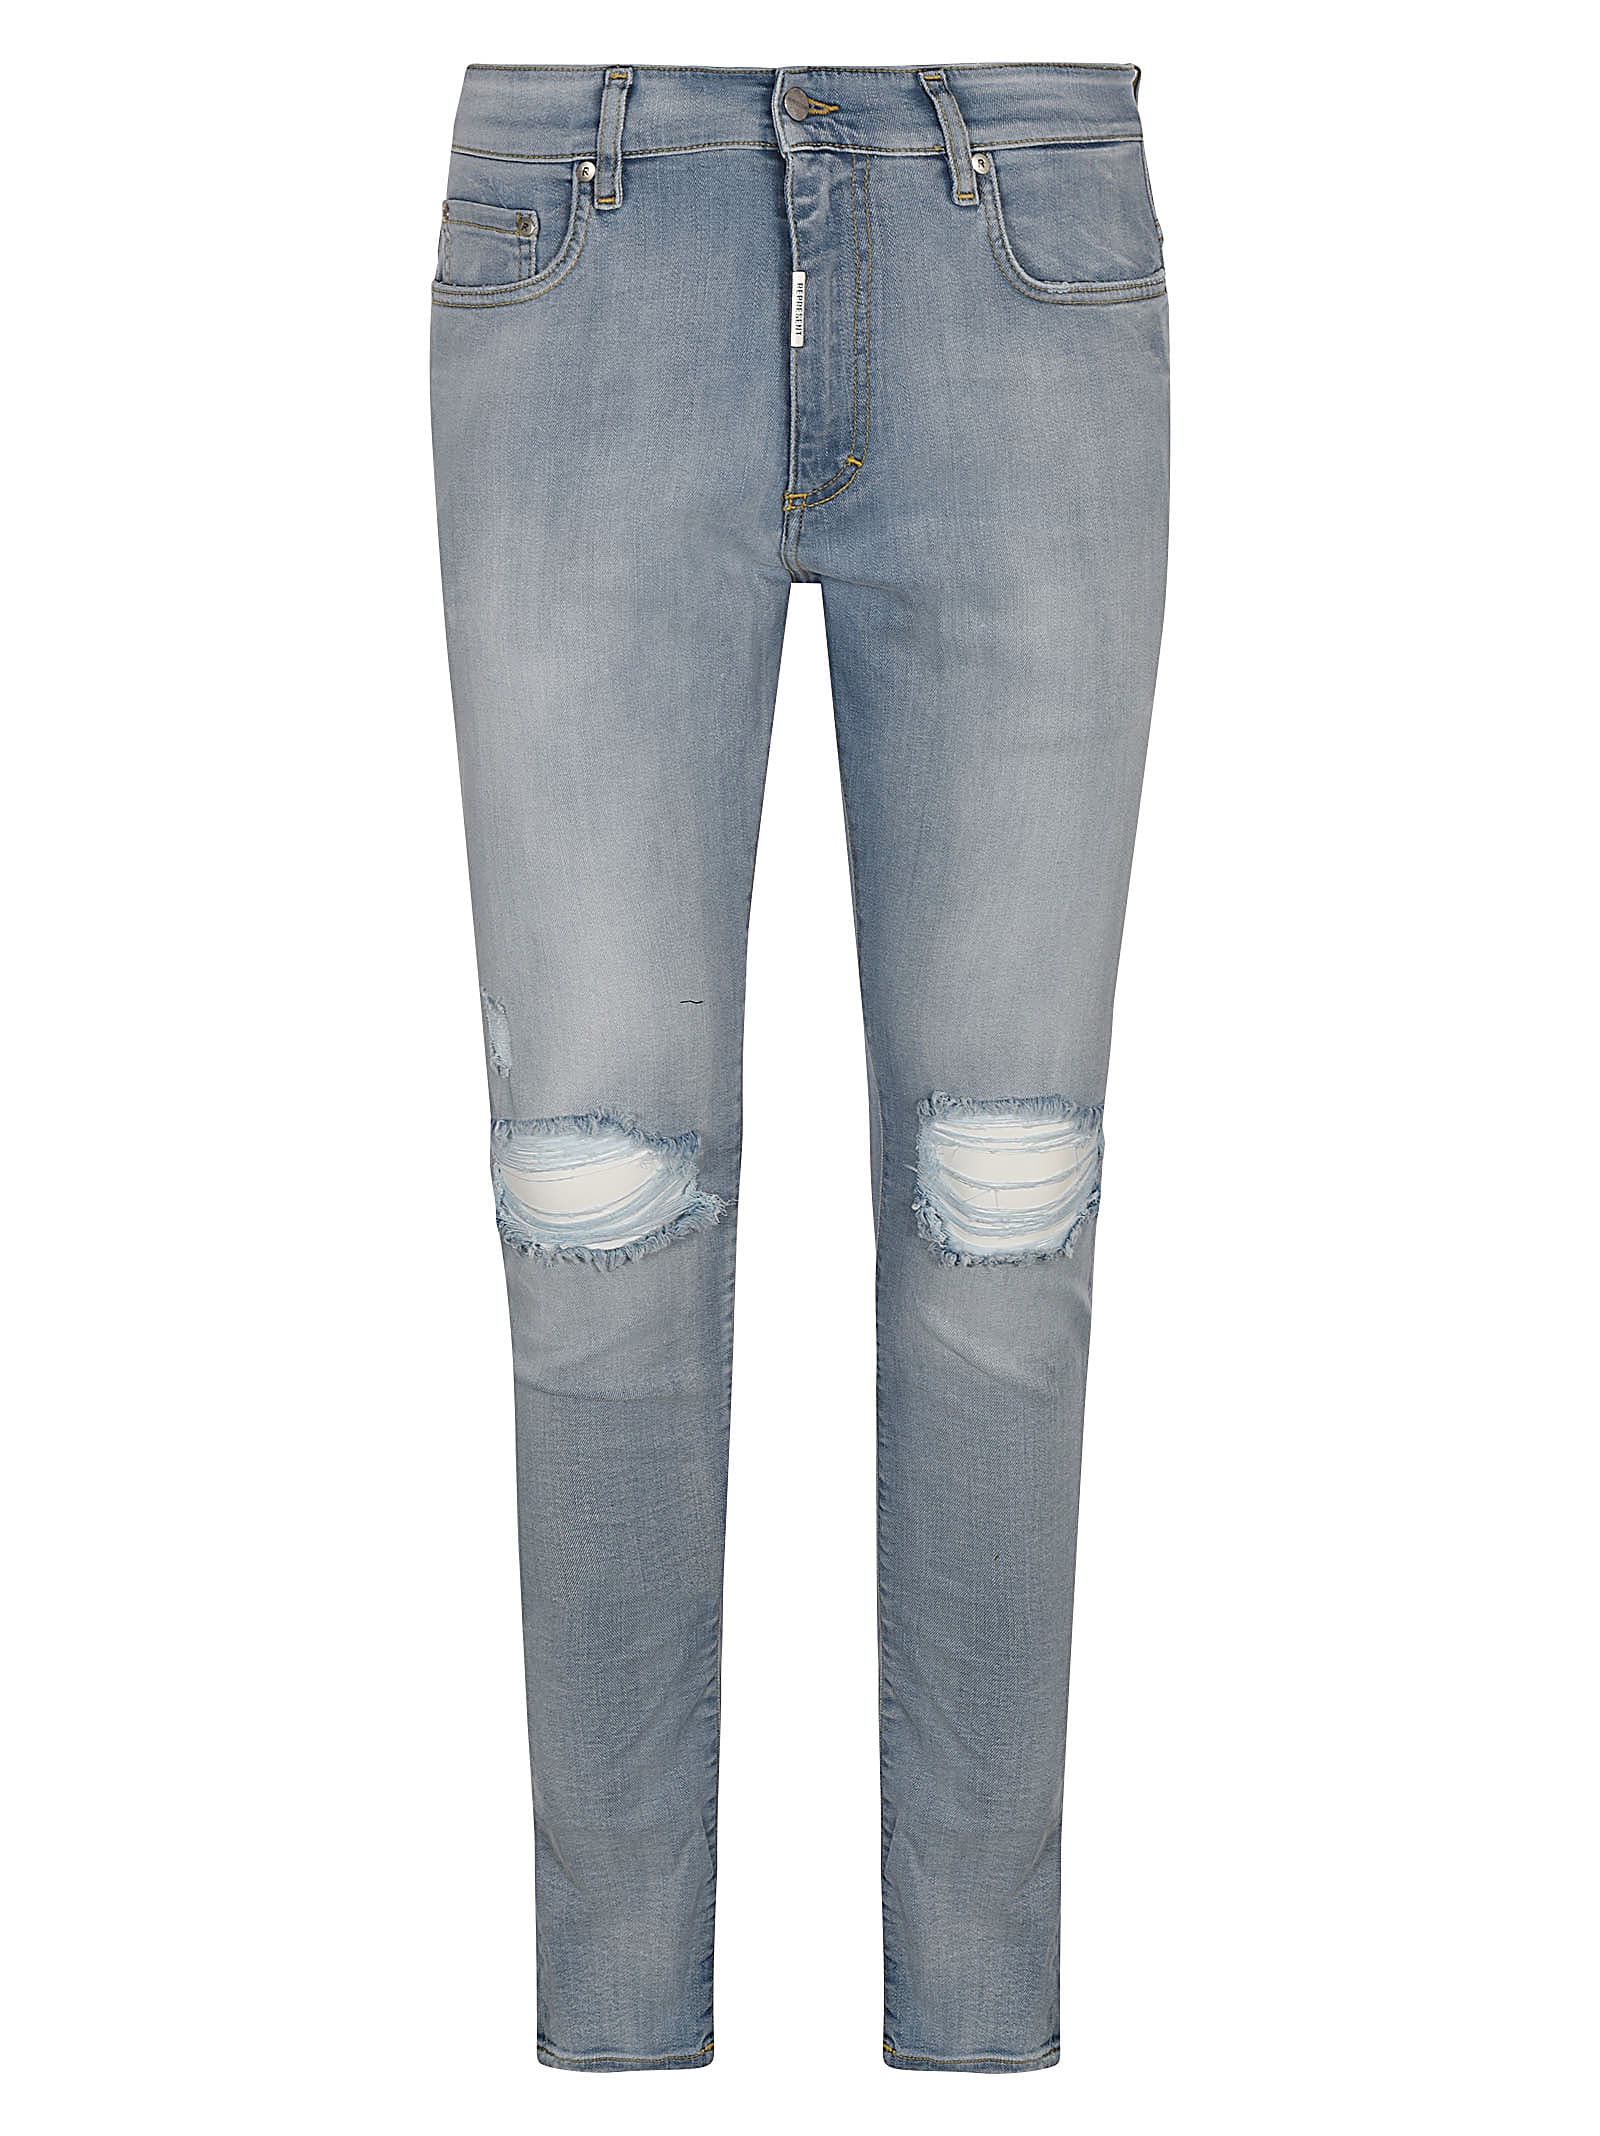 Represent Classic Ripped Jeans In Light Blue | ModeSens